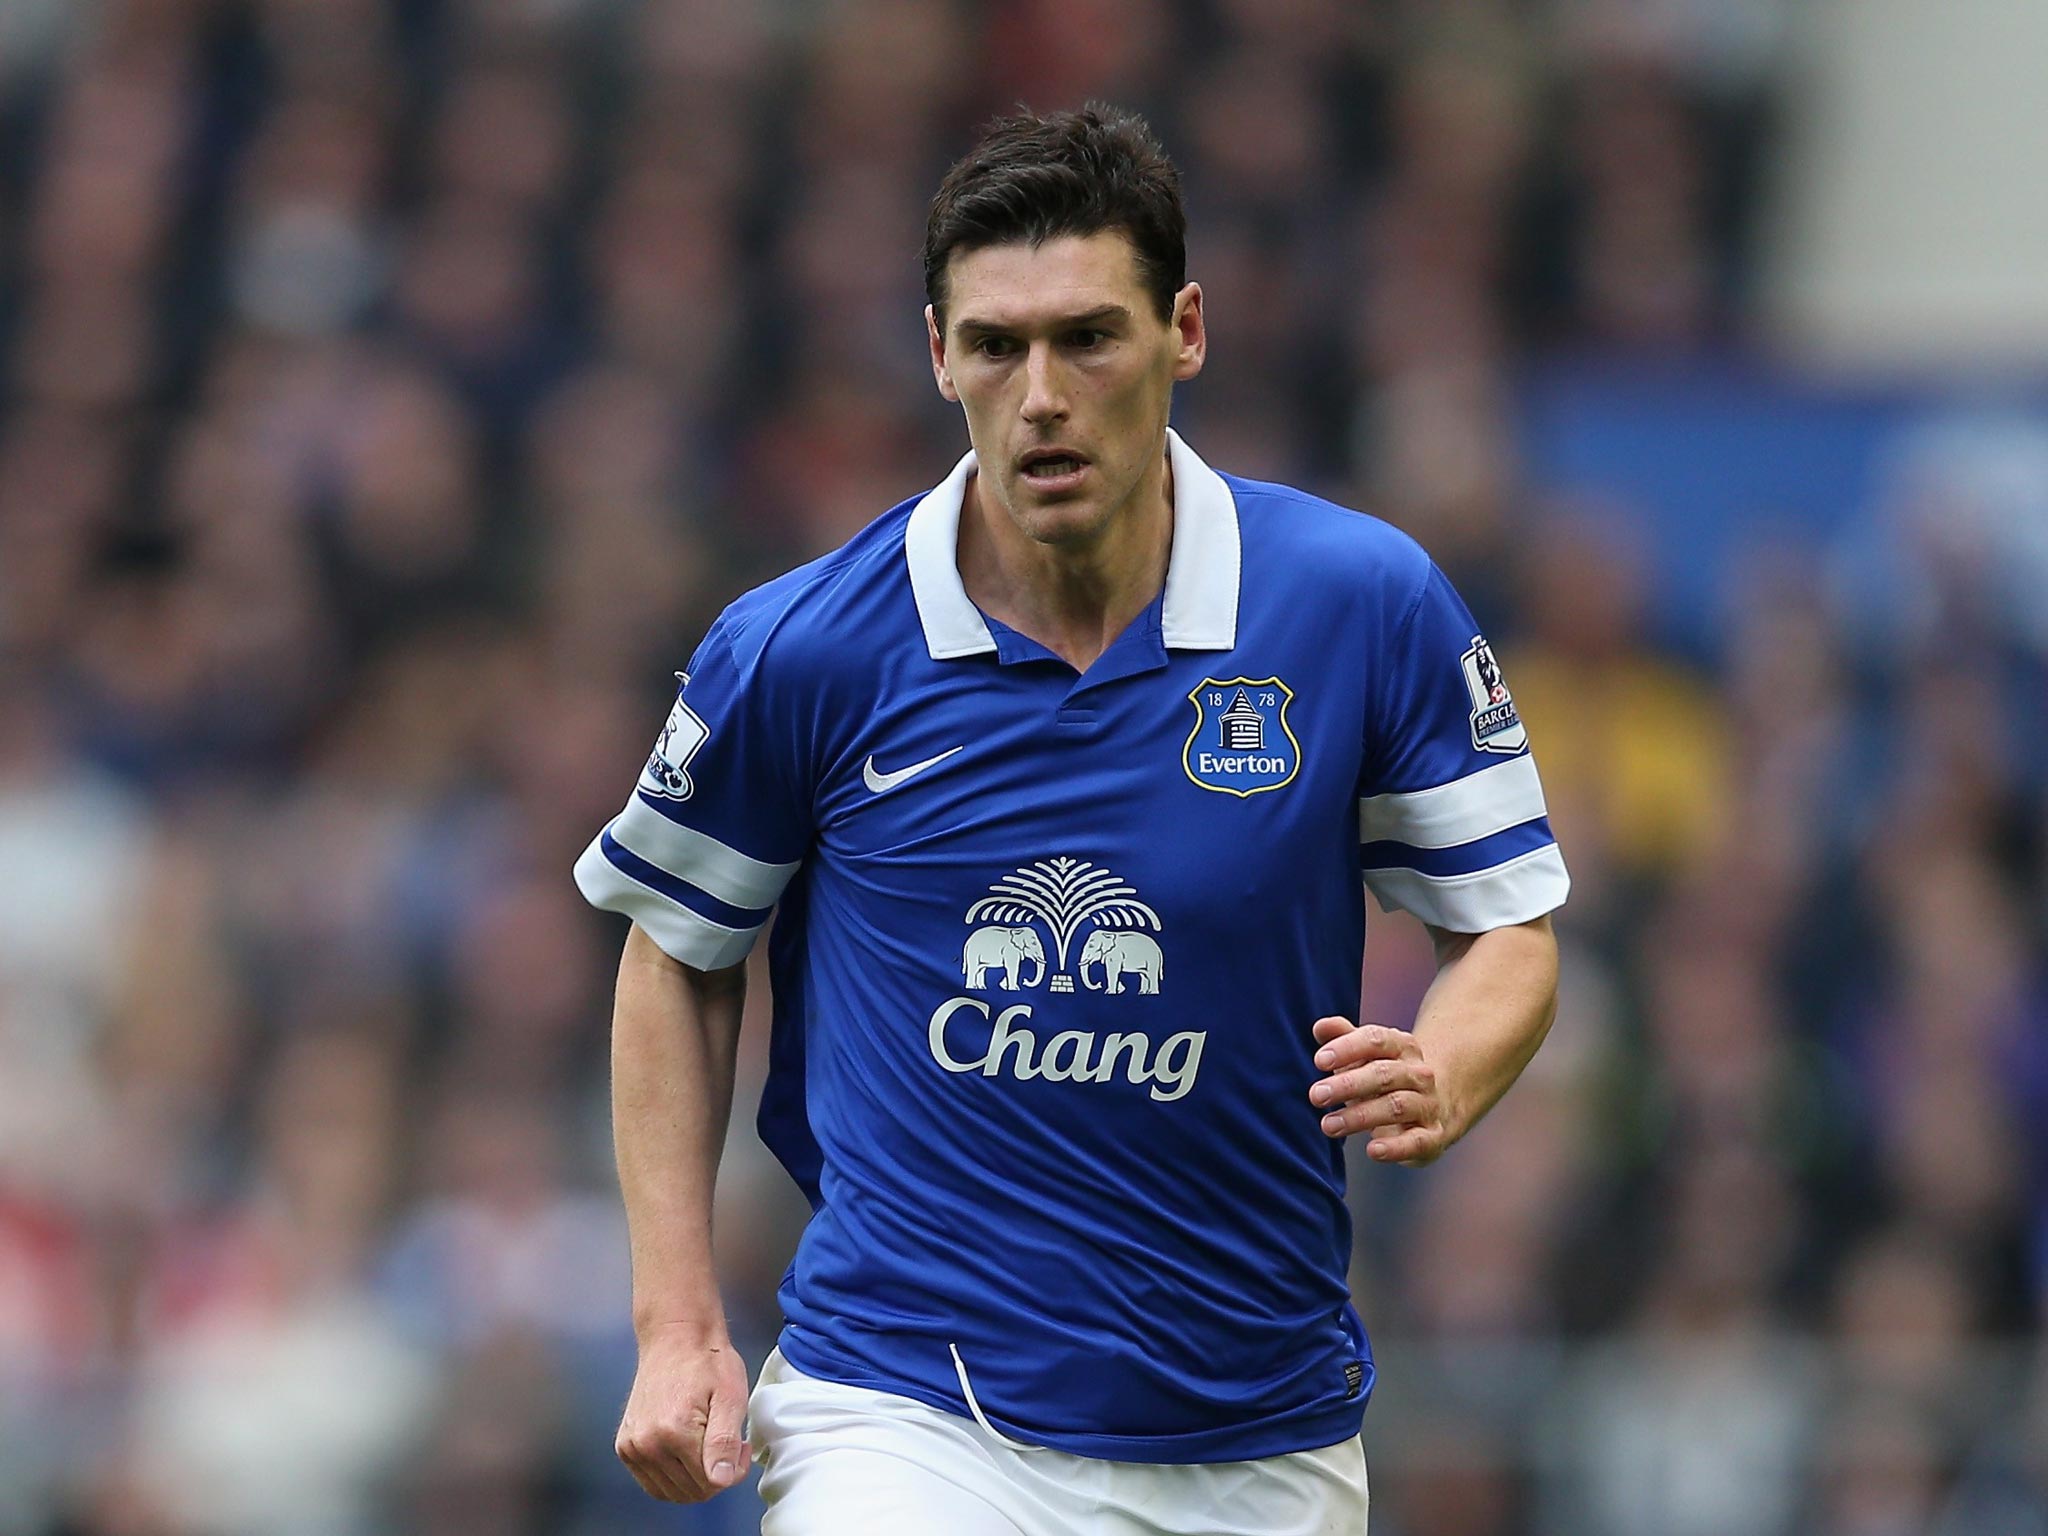 On-loan Gareth Barry is not allowed to line up against City